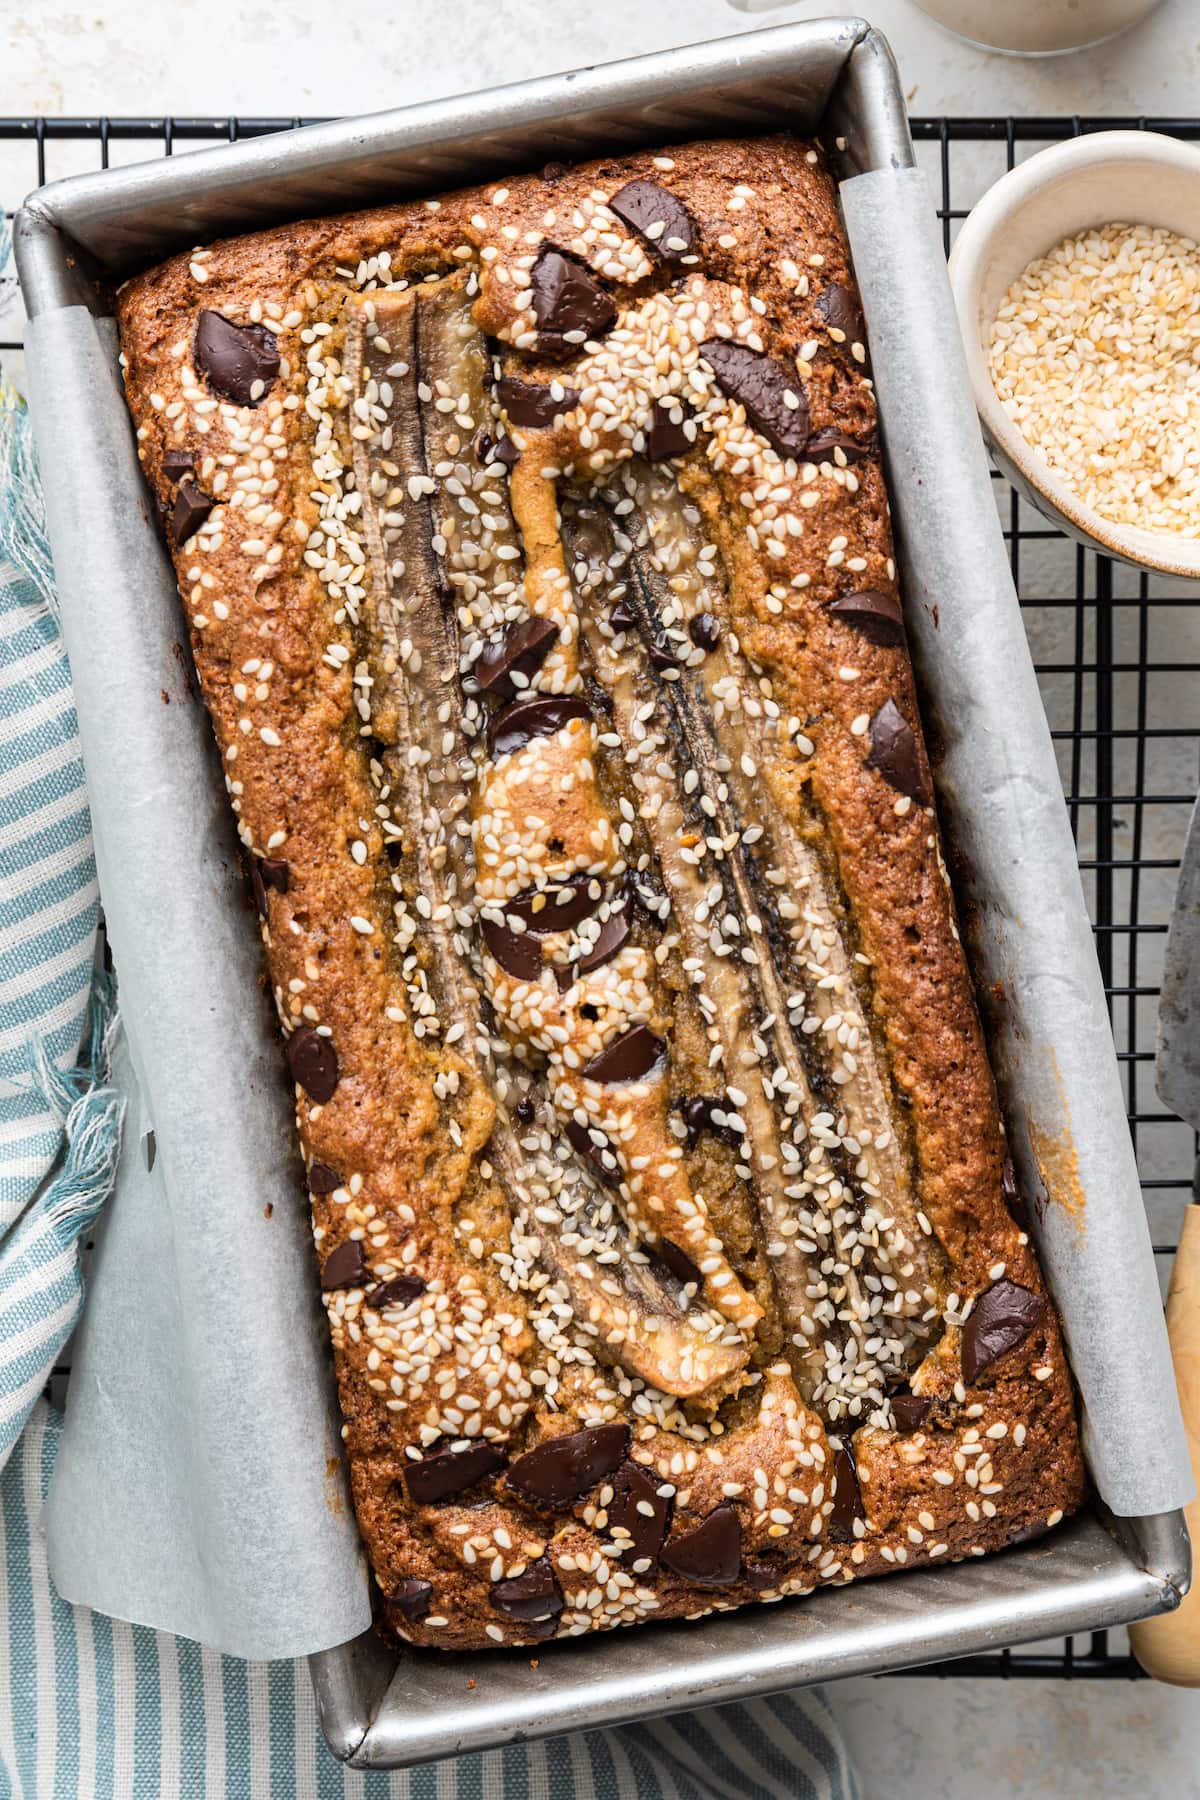 A top view of tahini banana bread inside a bread pan on a wire rack after being baked in the oven. The bread is topped with sesame seeds and chocolate chips.